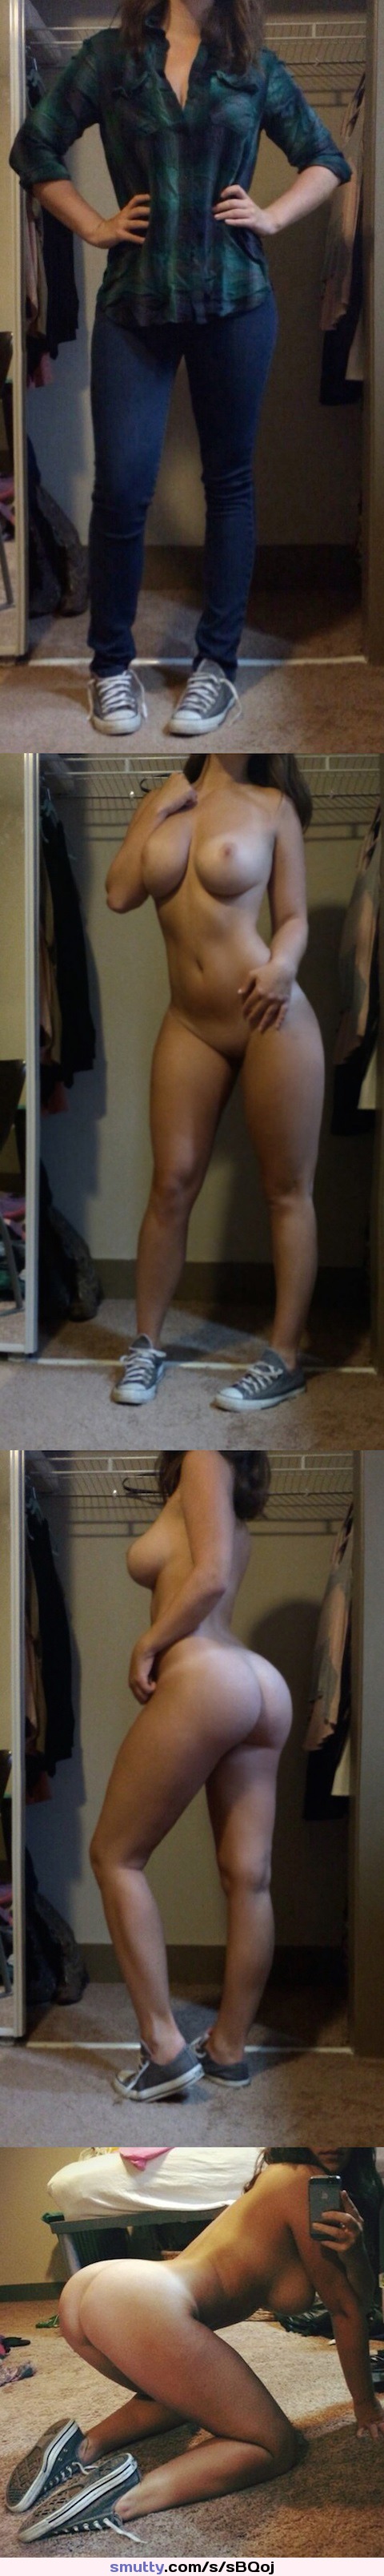 sweetestmary sweet holes maryfress naked cam #amateur #homegrown #fdau #facedownasseup #hot #sexy #collegegirls #pawg #whooty #horny #bootyonfacebook #smutty #procrastibator #sneakers